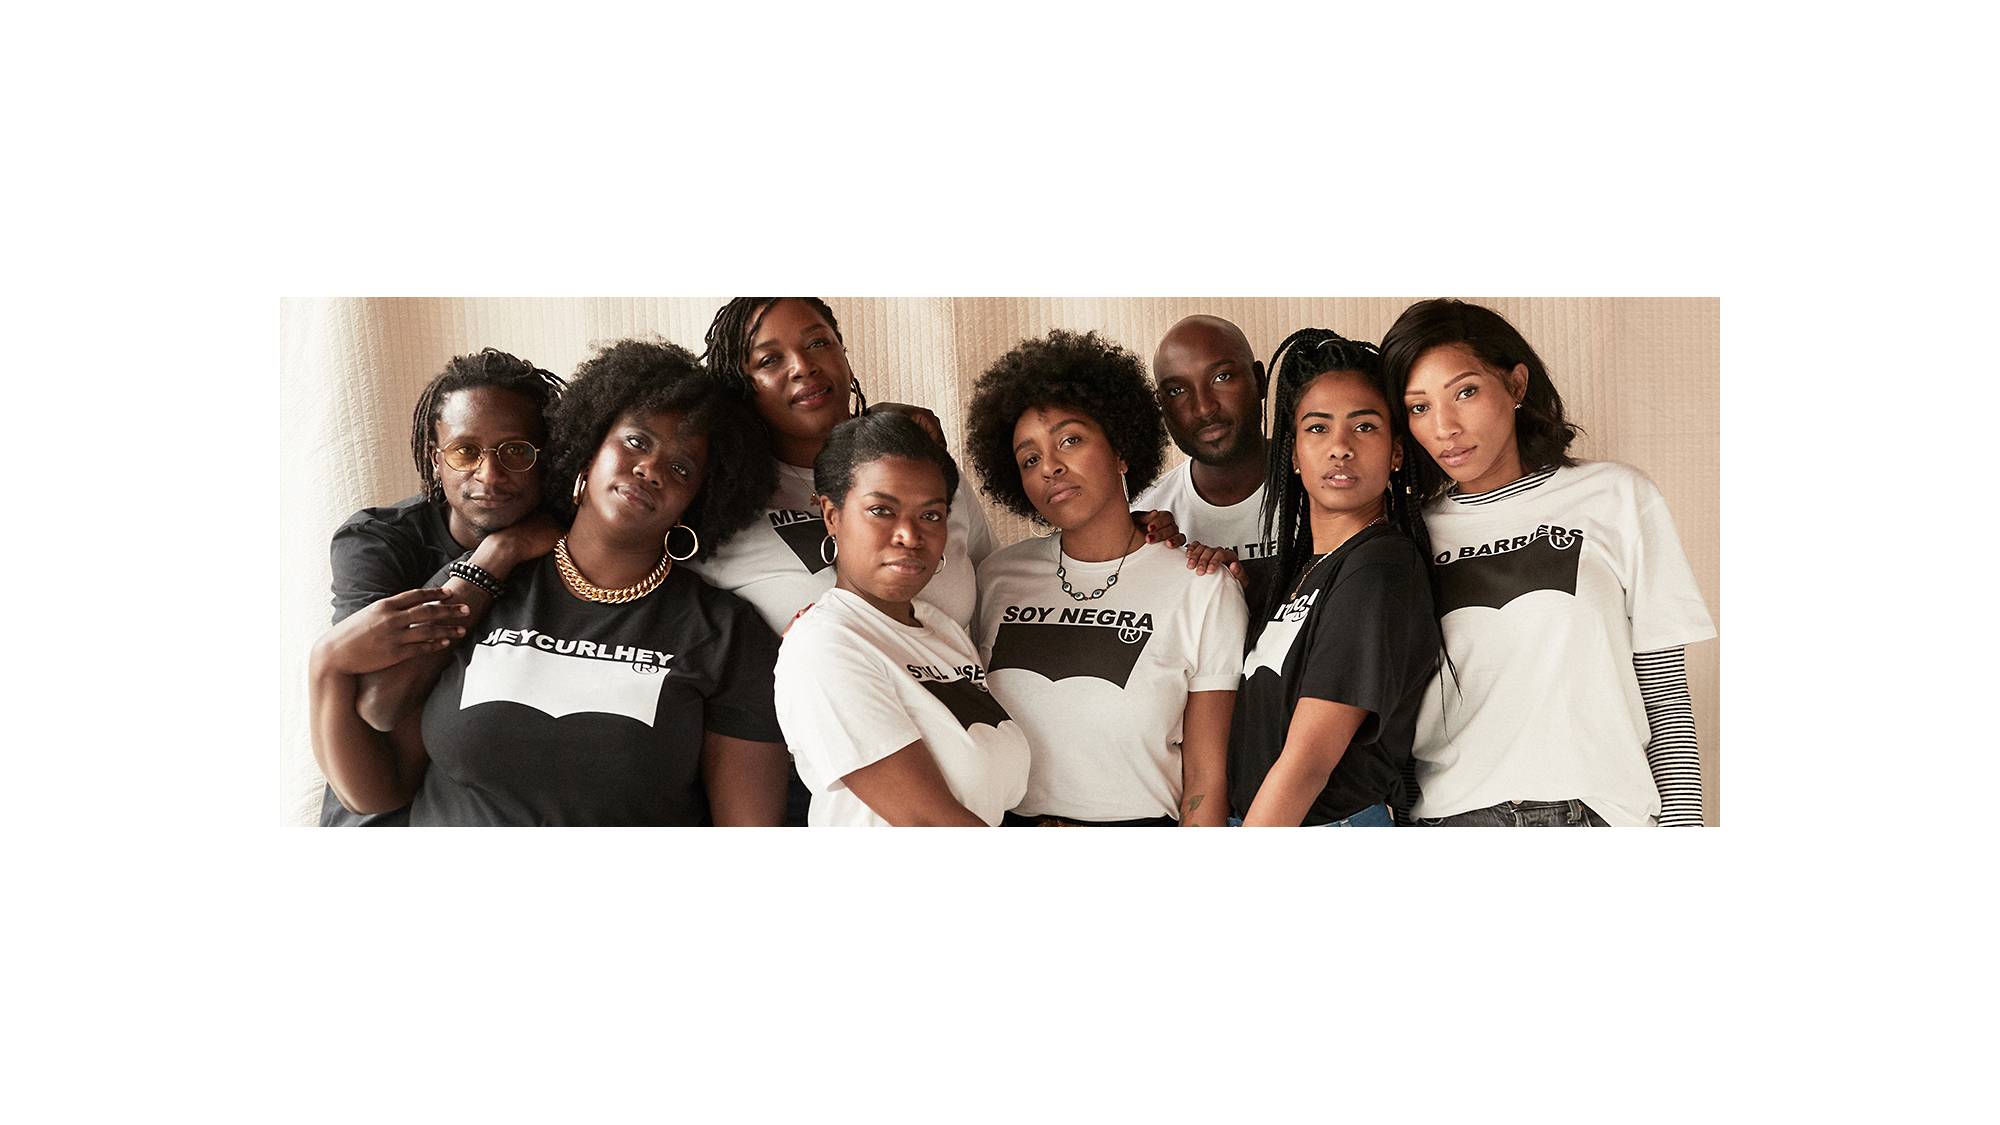 Levi's® employees wearing customized Levi's® tee shirts in honor of Black History Month.